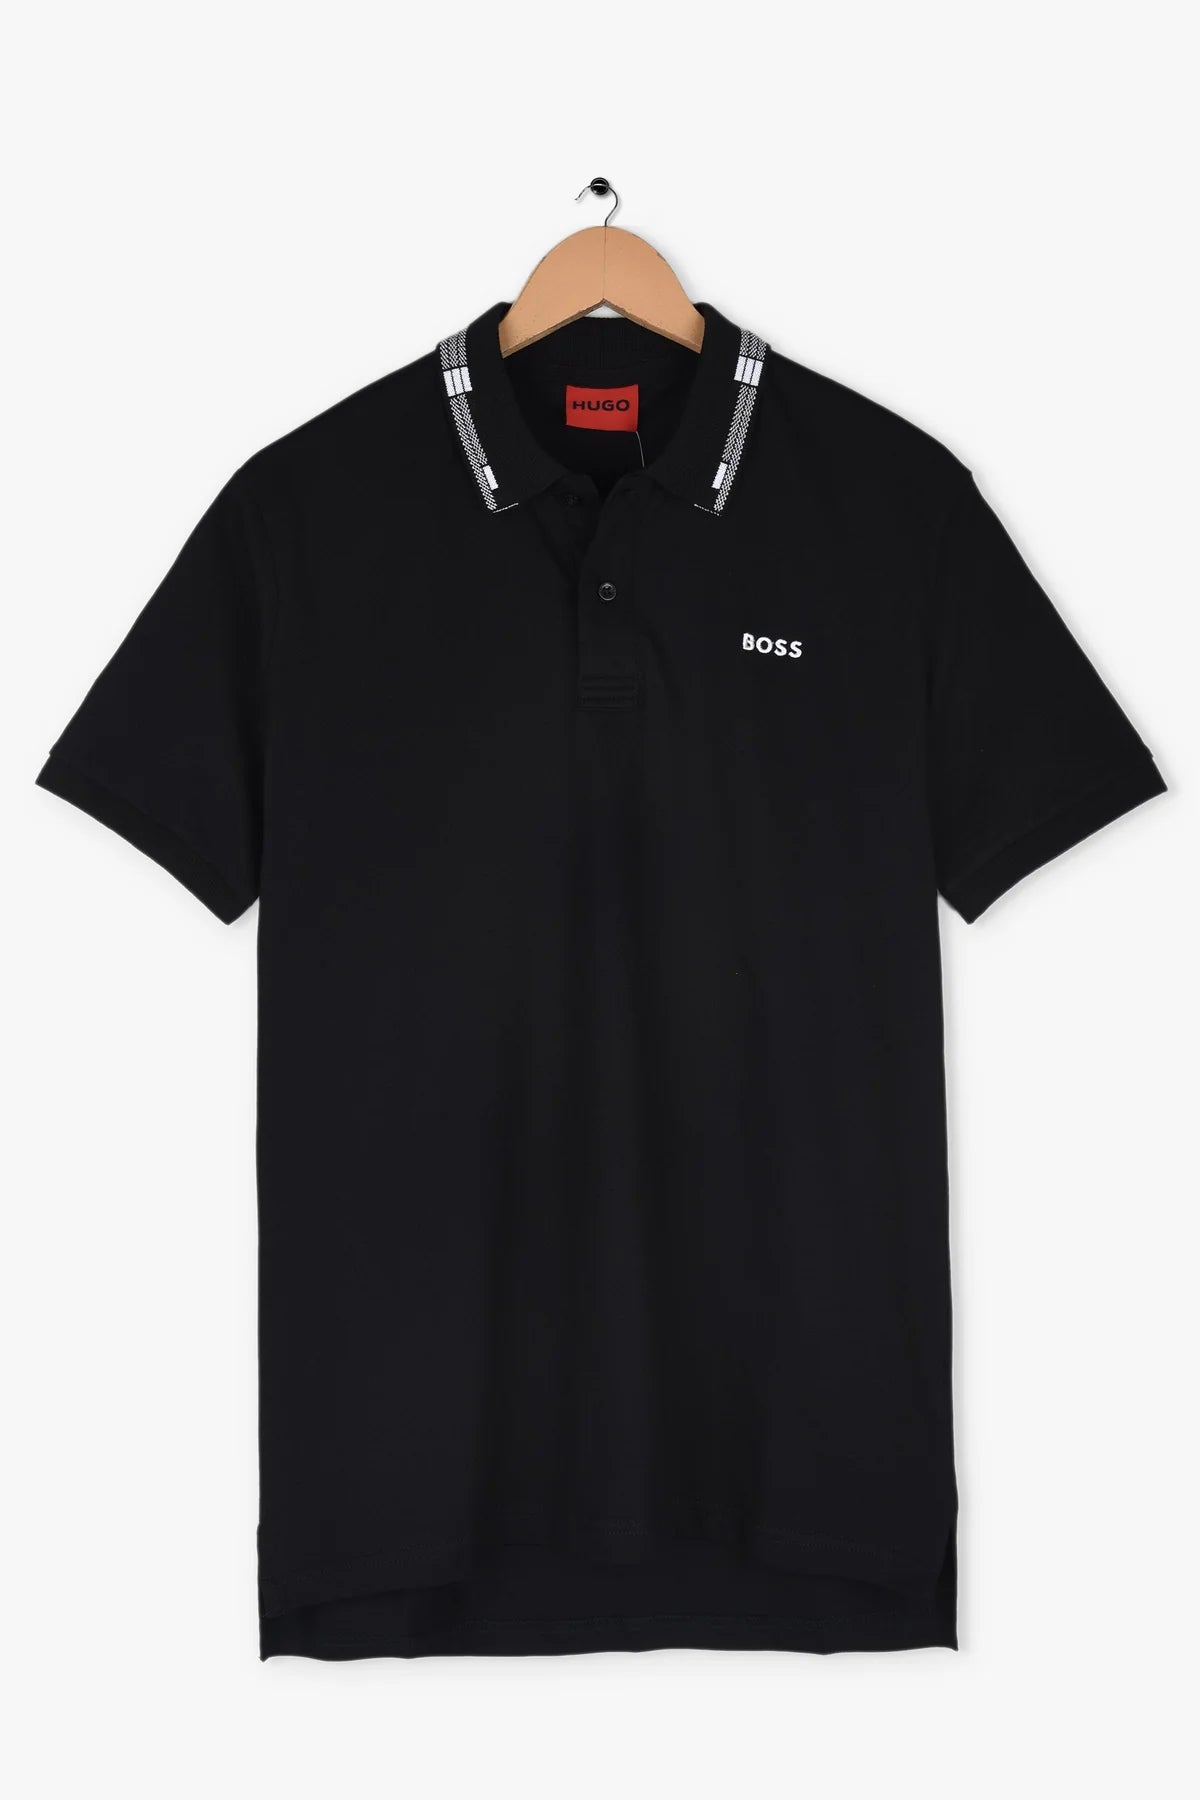 Imported Polo shirts